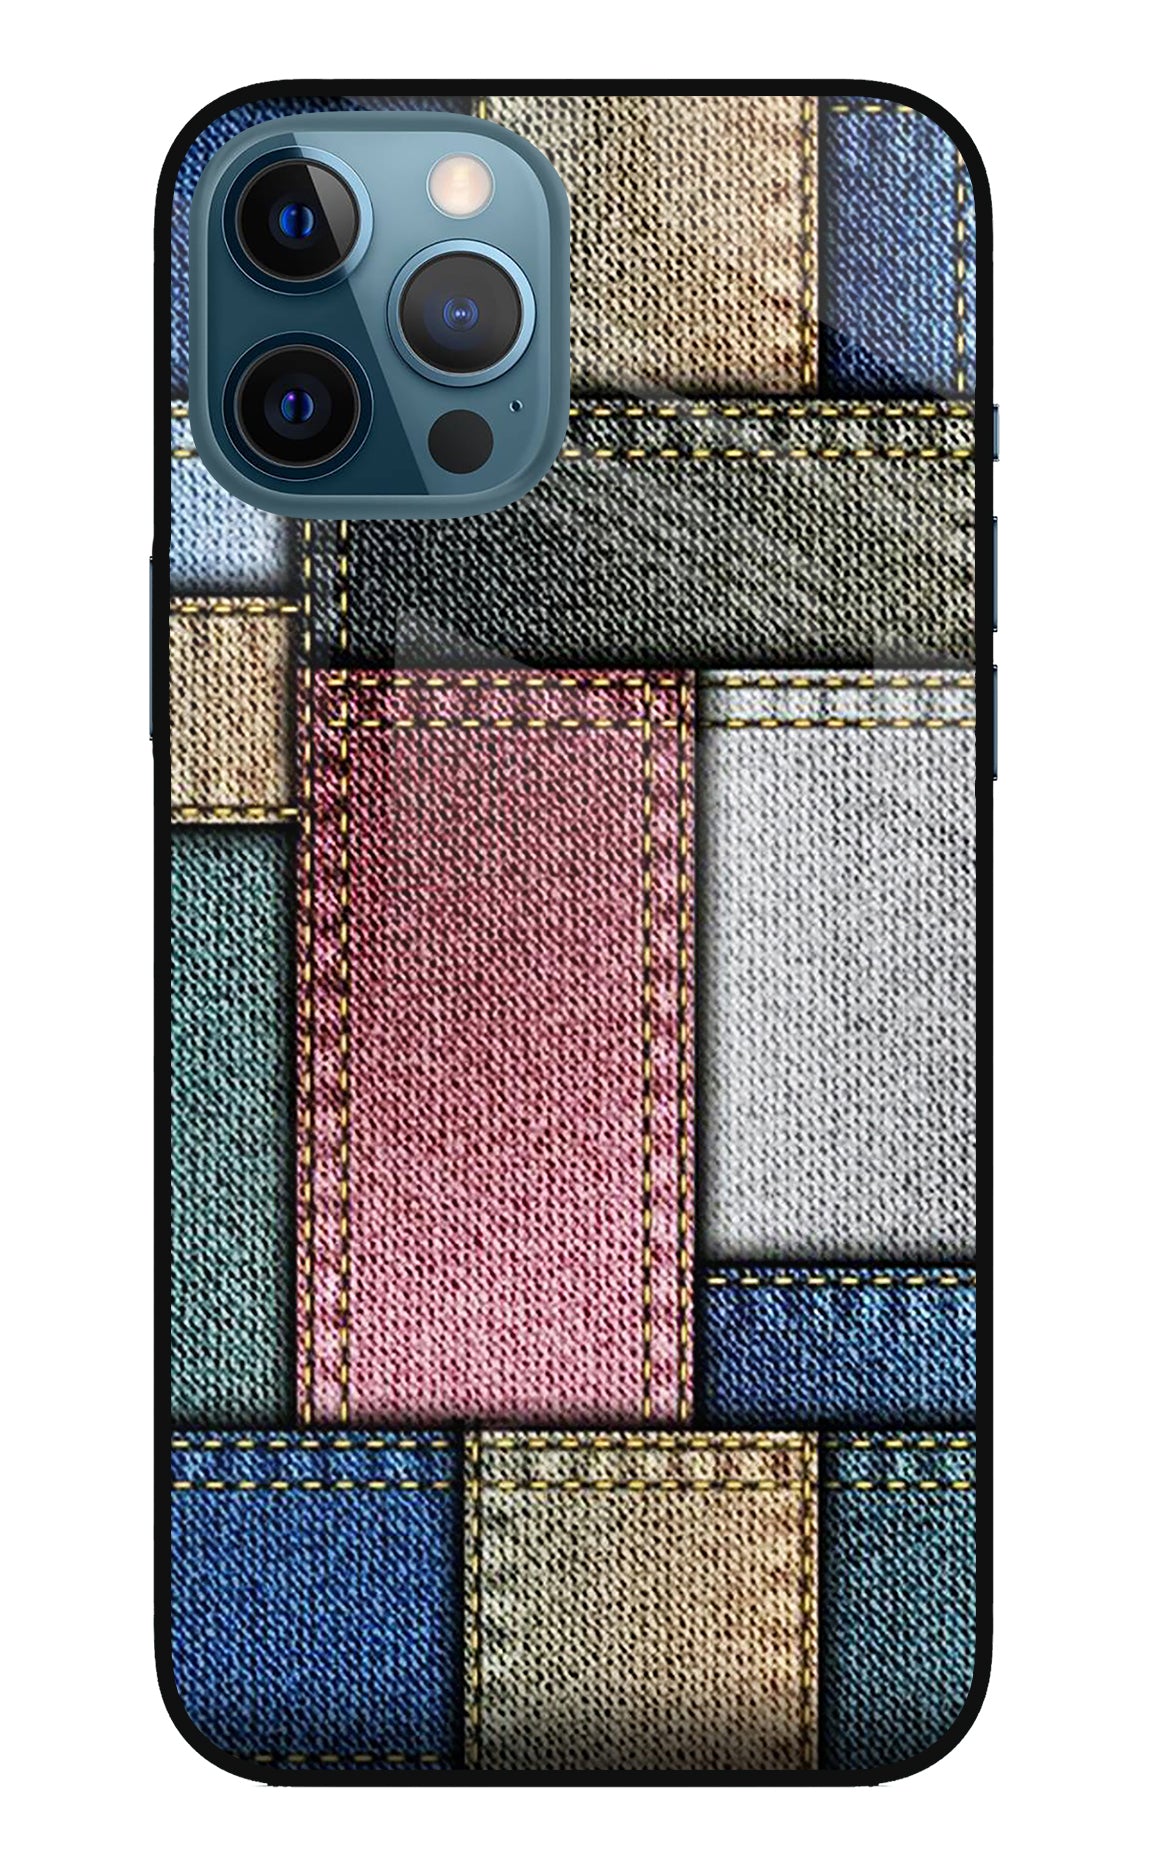 Multicolor Jeans iPhone 12 Pro Max Back Cover